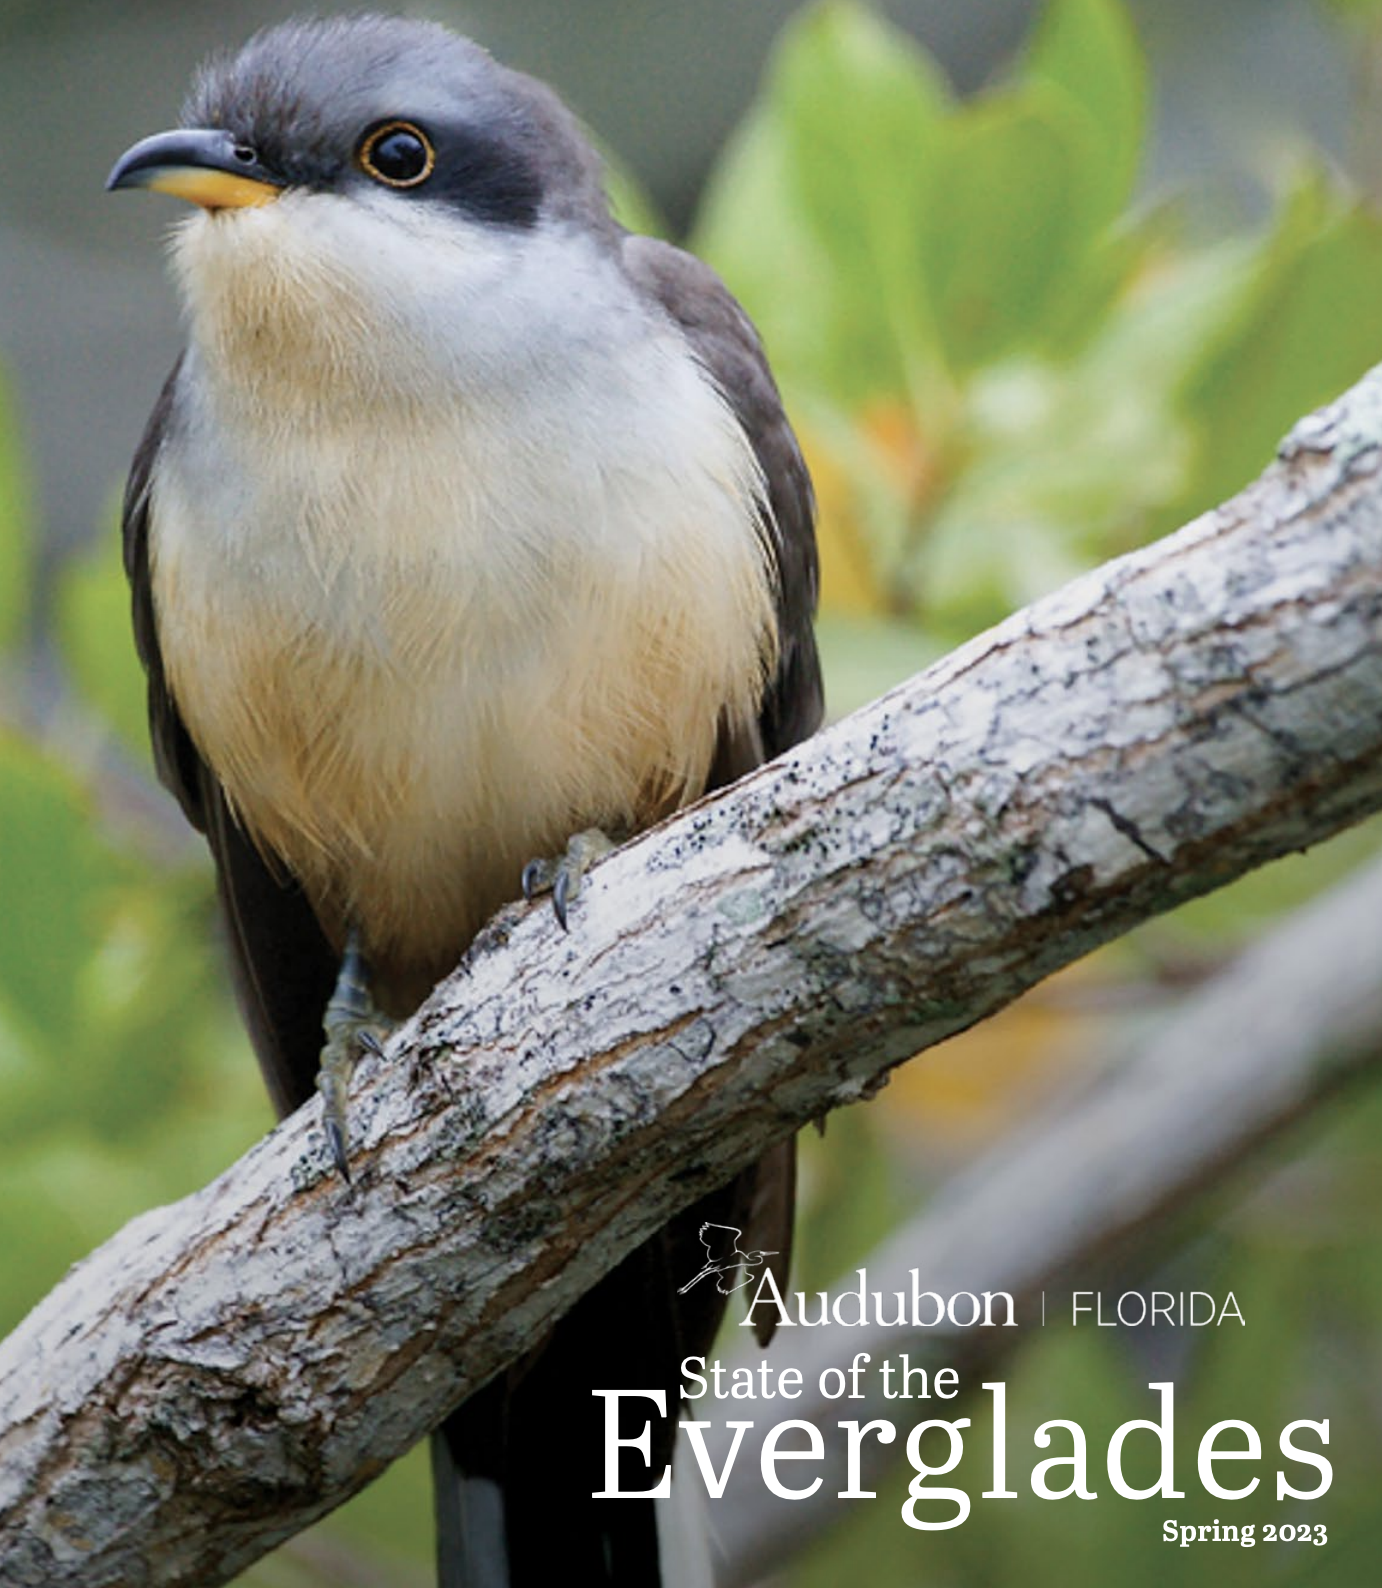 The cover of the report featuring a Mangrove Cuckoo.